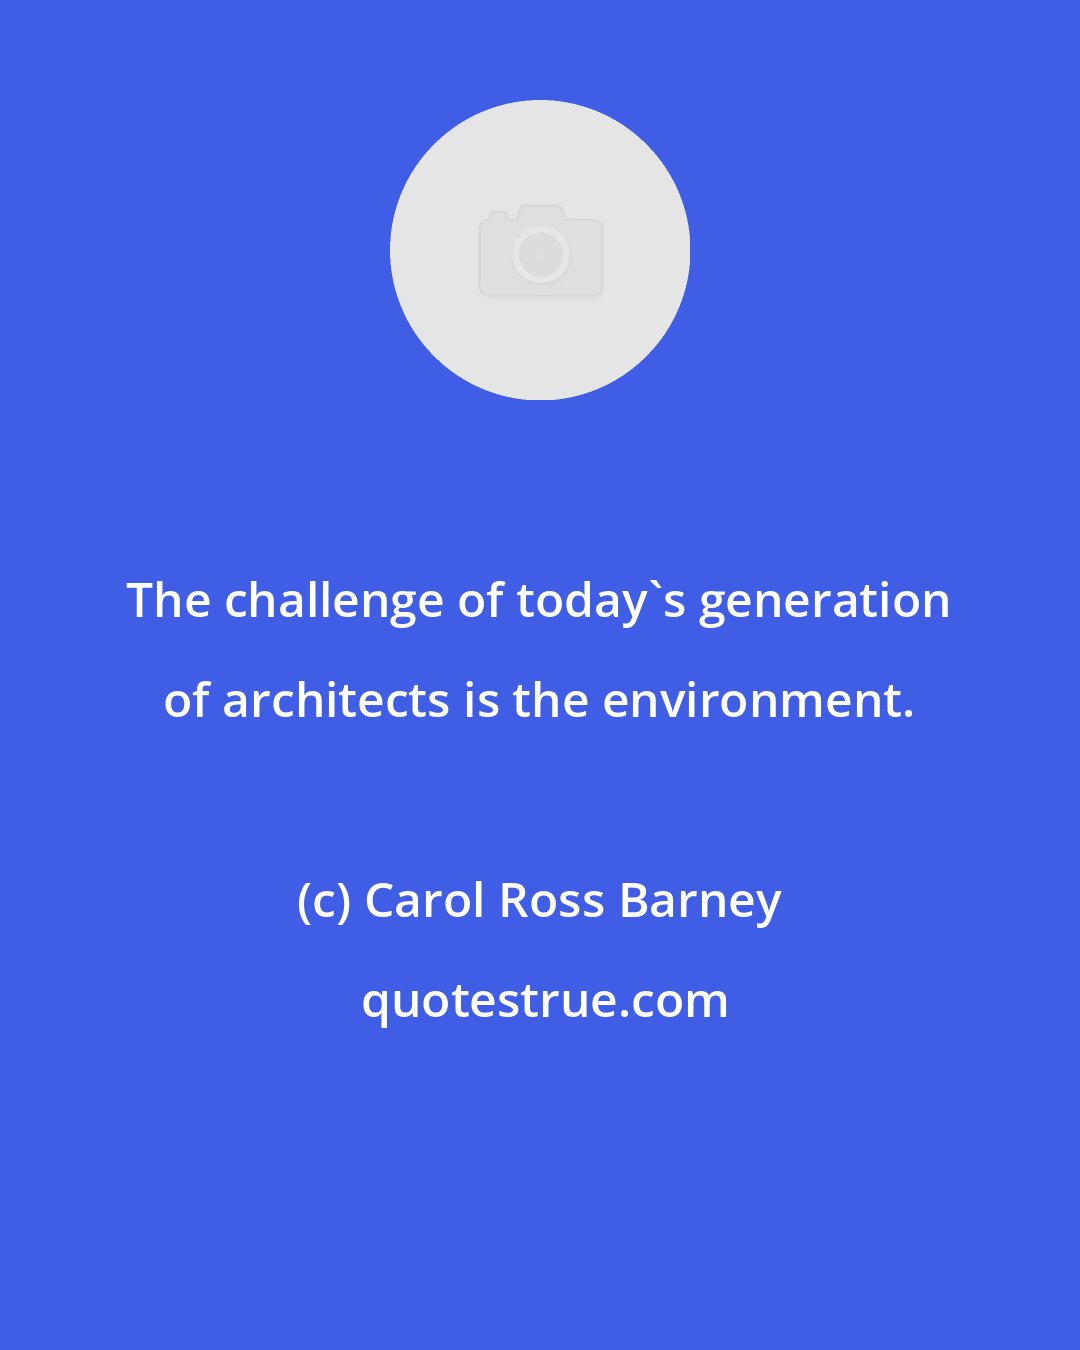 Carol Ross Barney: The challenge of today's generation of architects is the environment.